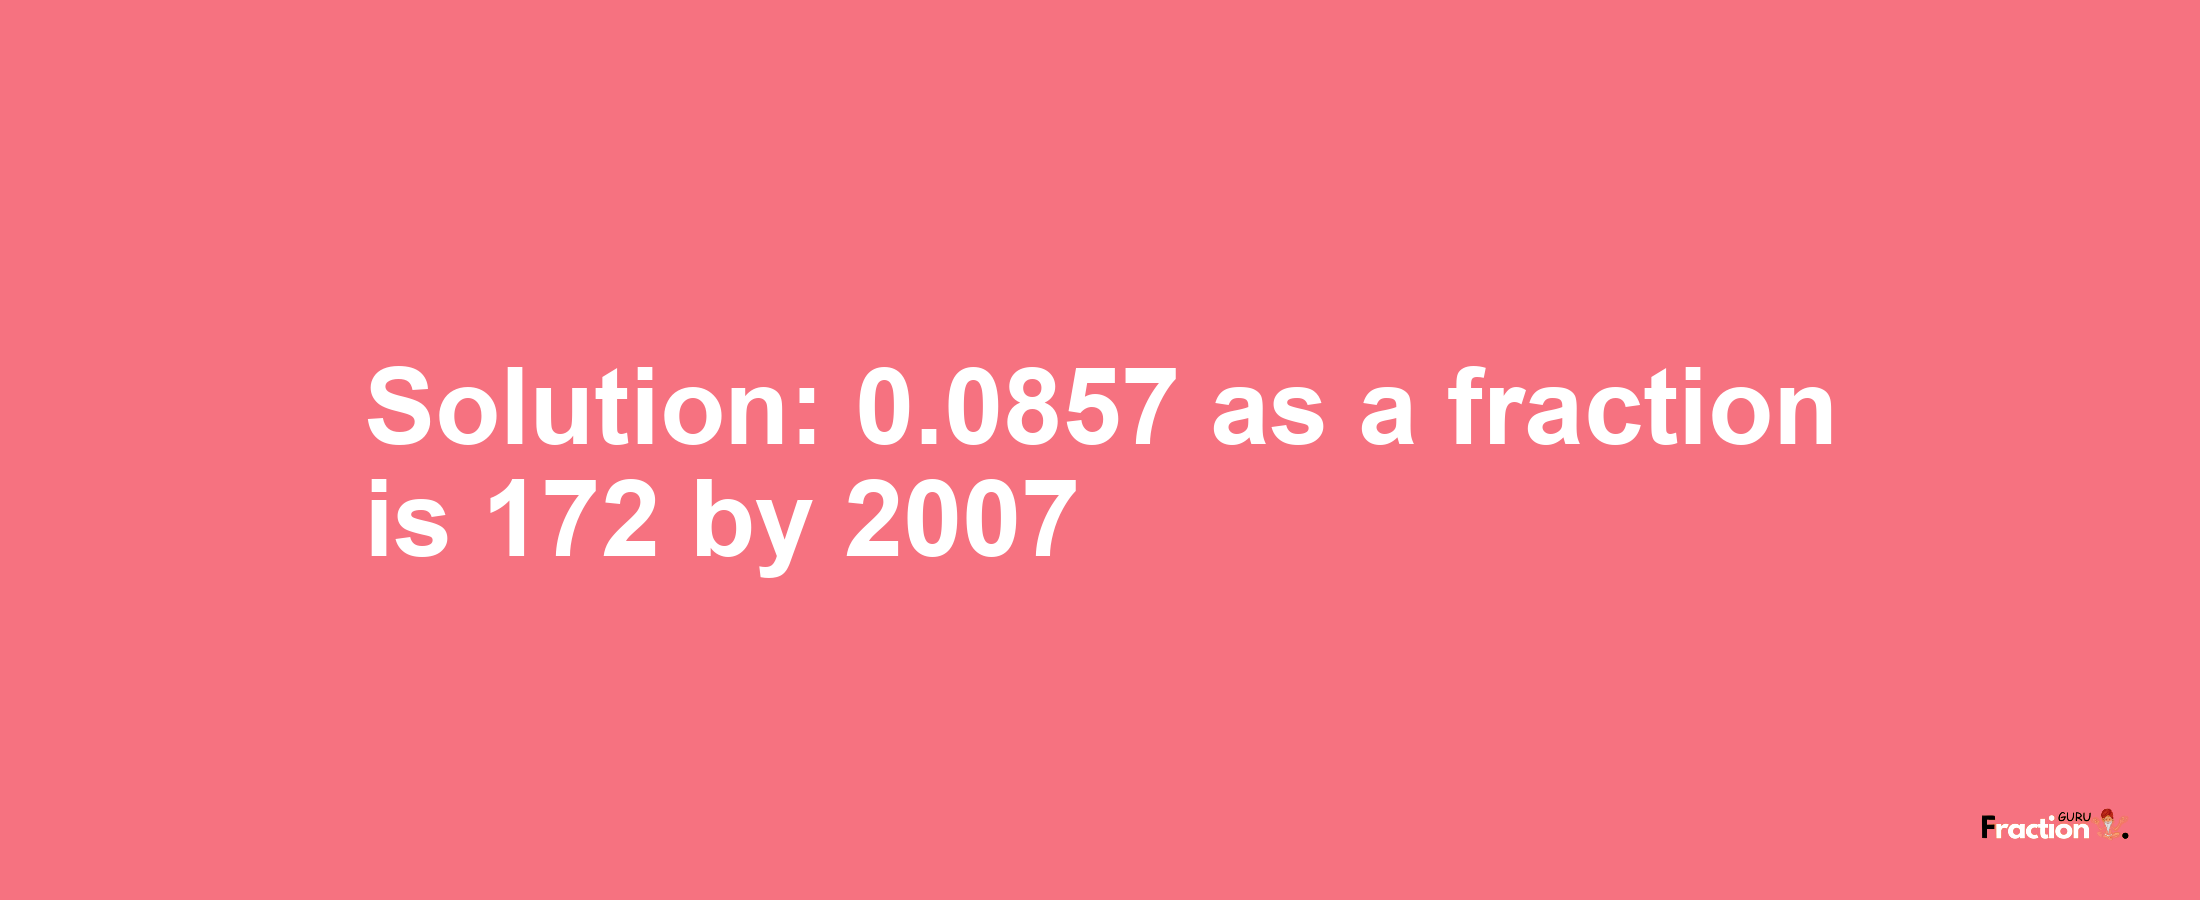 Solution:0.0857 as a fraction is 172/2007